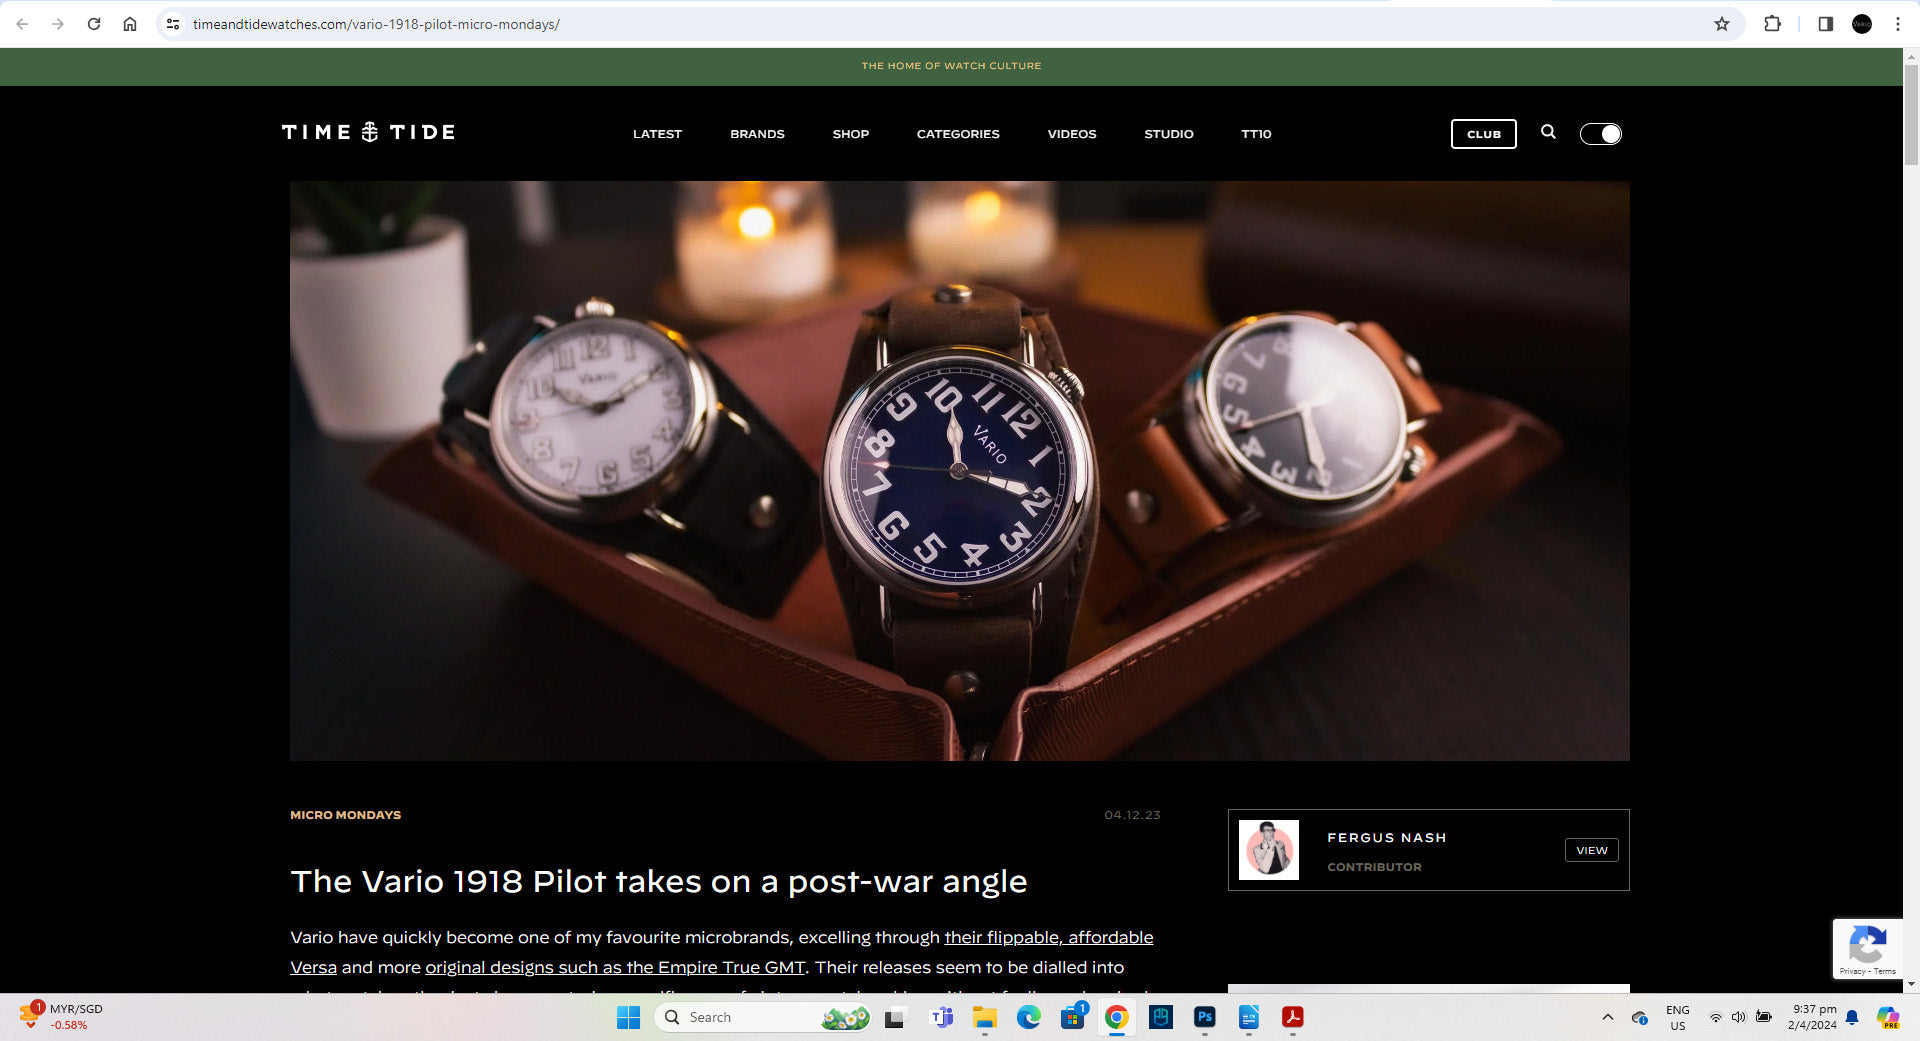 Vario 1918 Pilot featured on Time and Tide